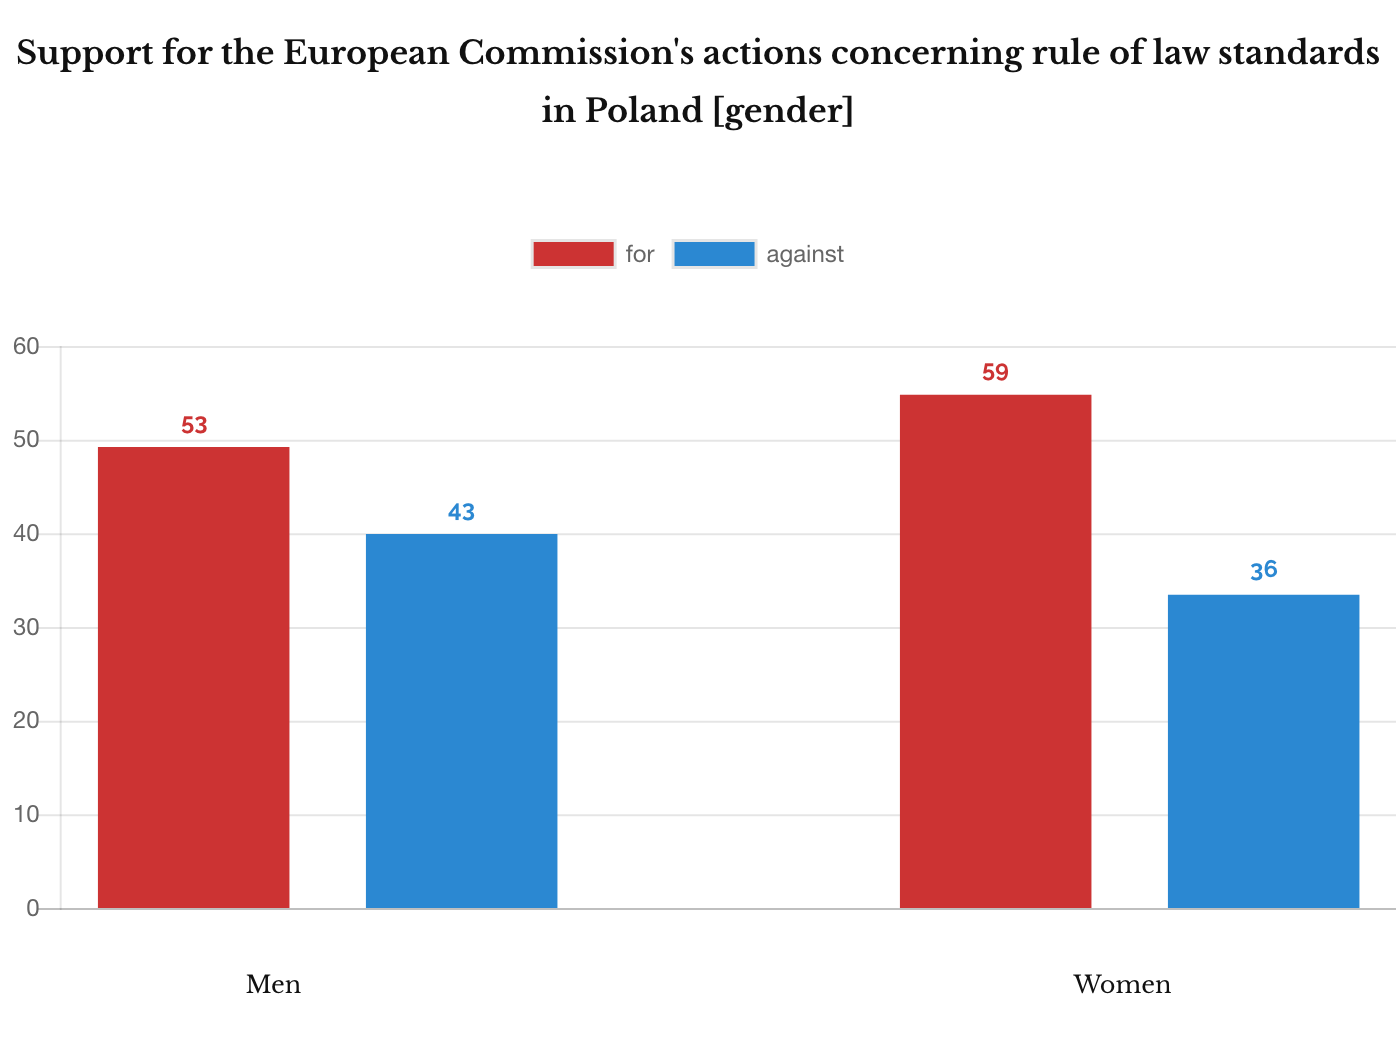 IPSOS December 2018. Support for the European Commission action concerning rule of law [women and men]